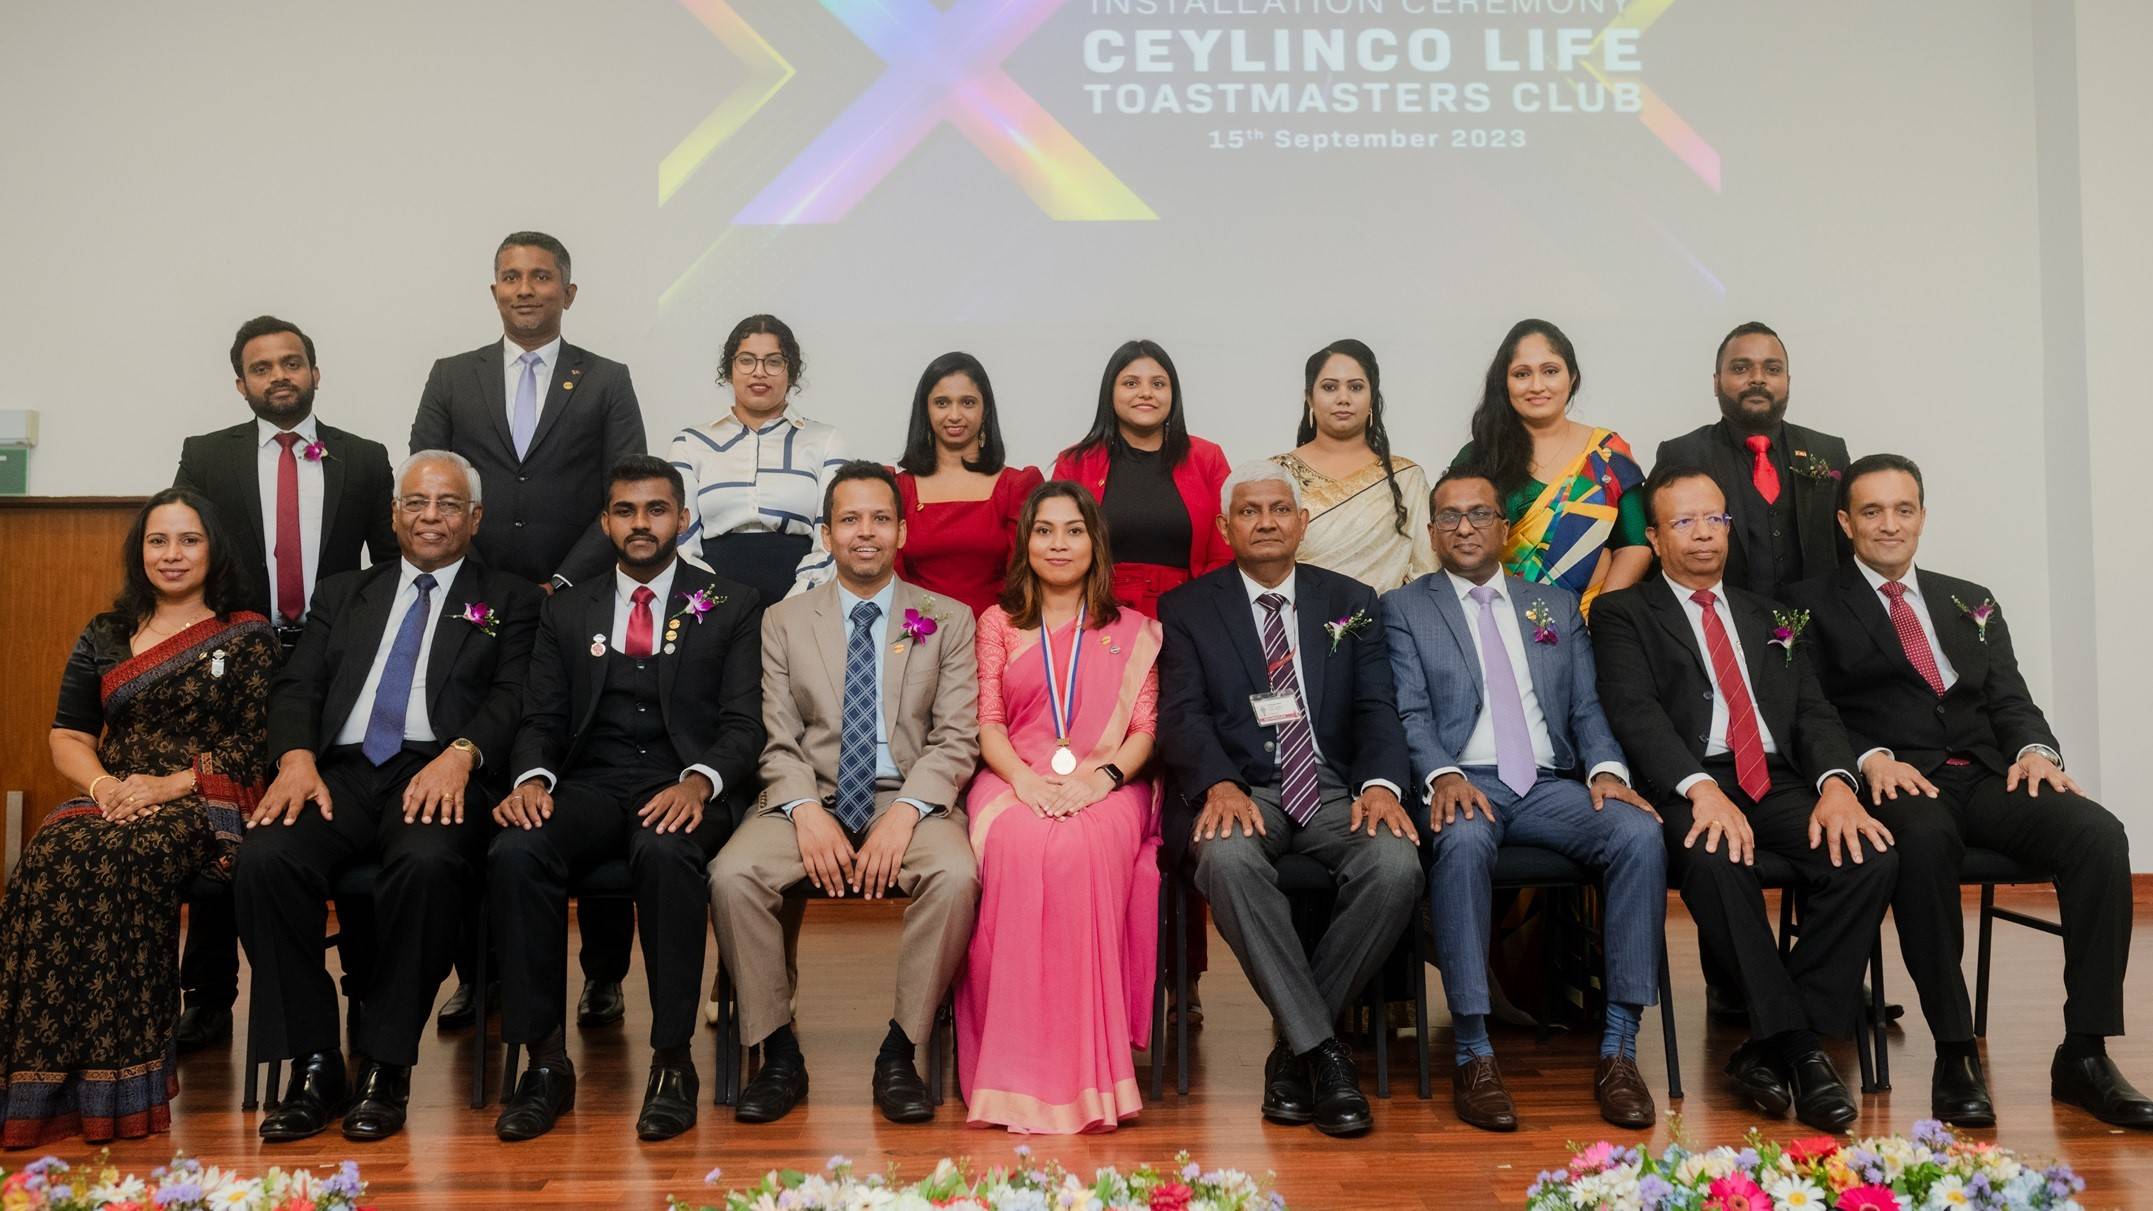 The new executive committee of the Ceylinco Life Toastmasters club